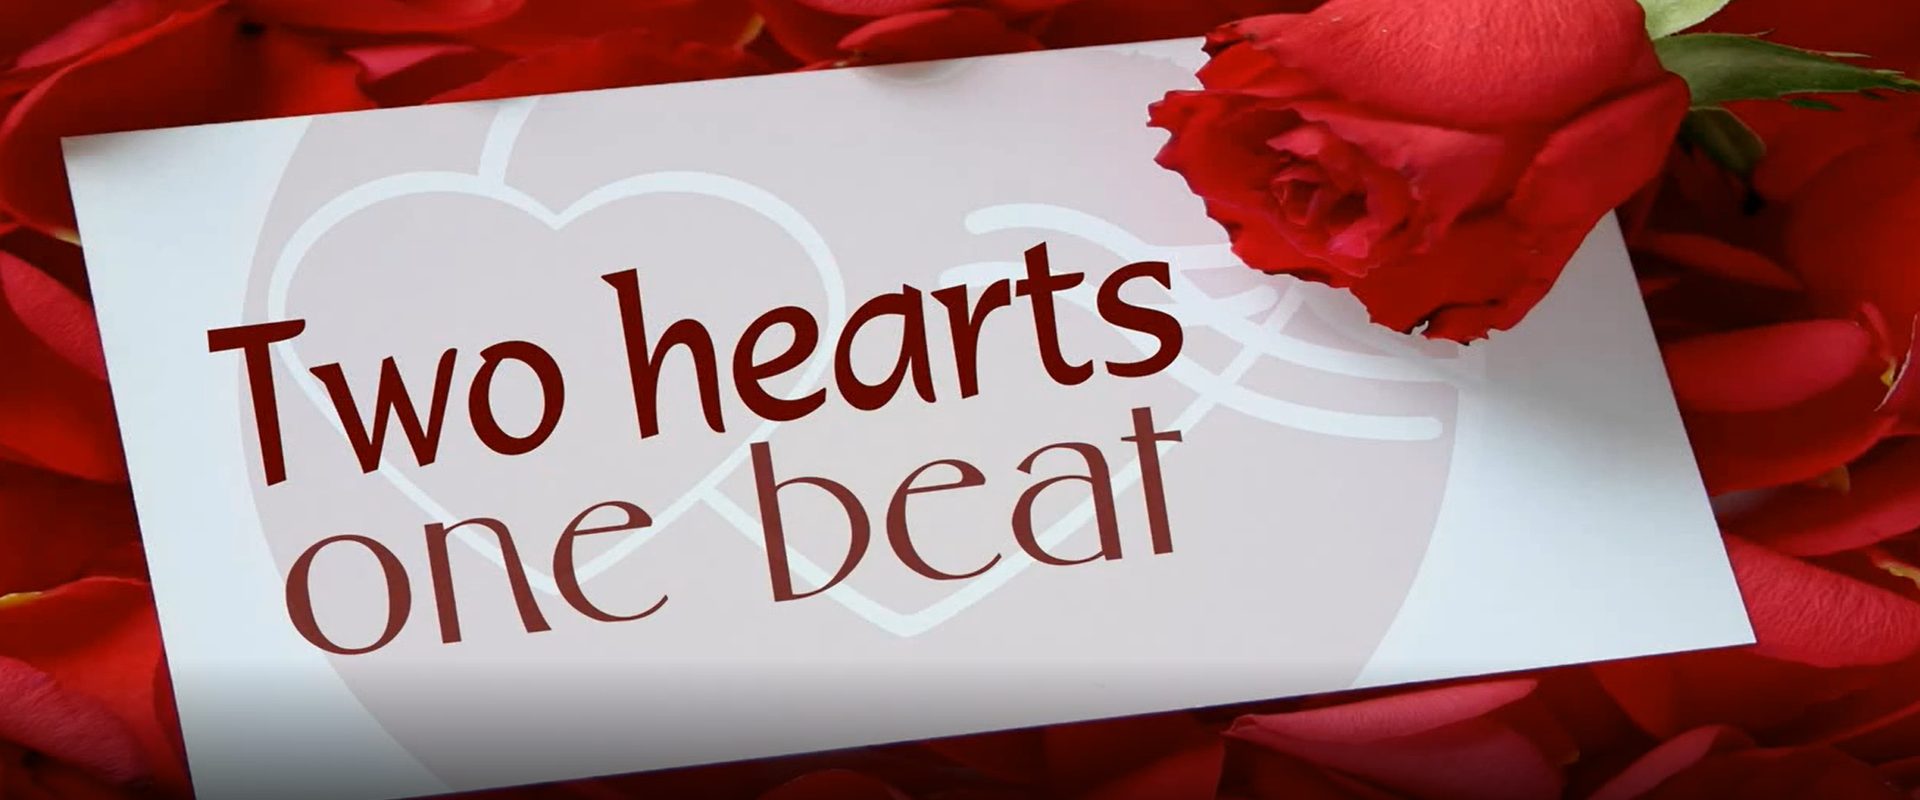 Two hearts - one beat